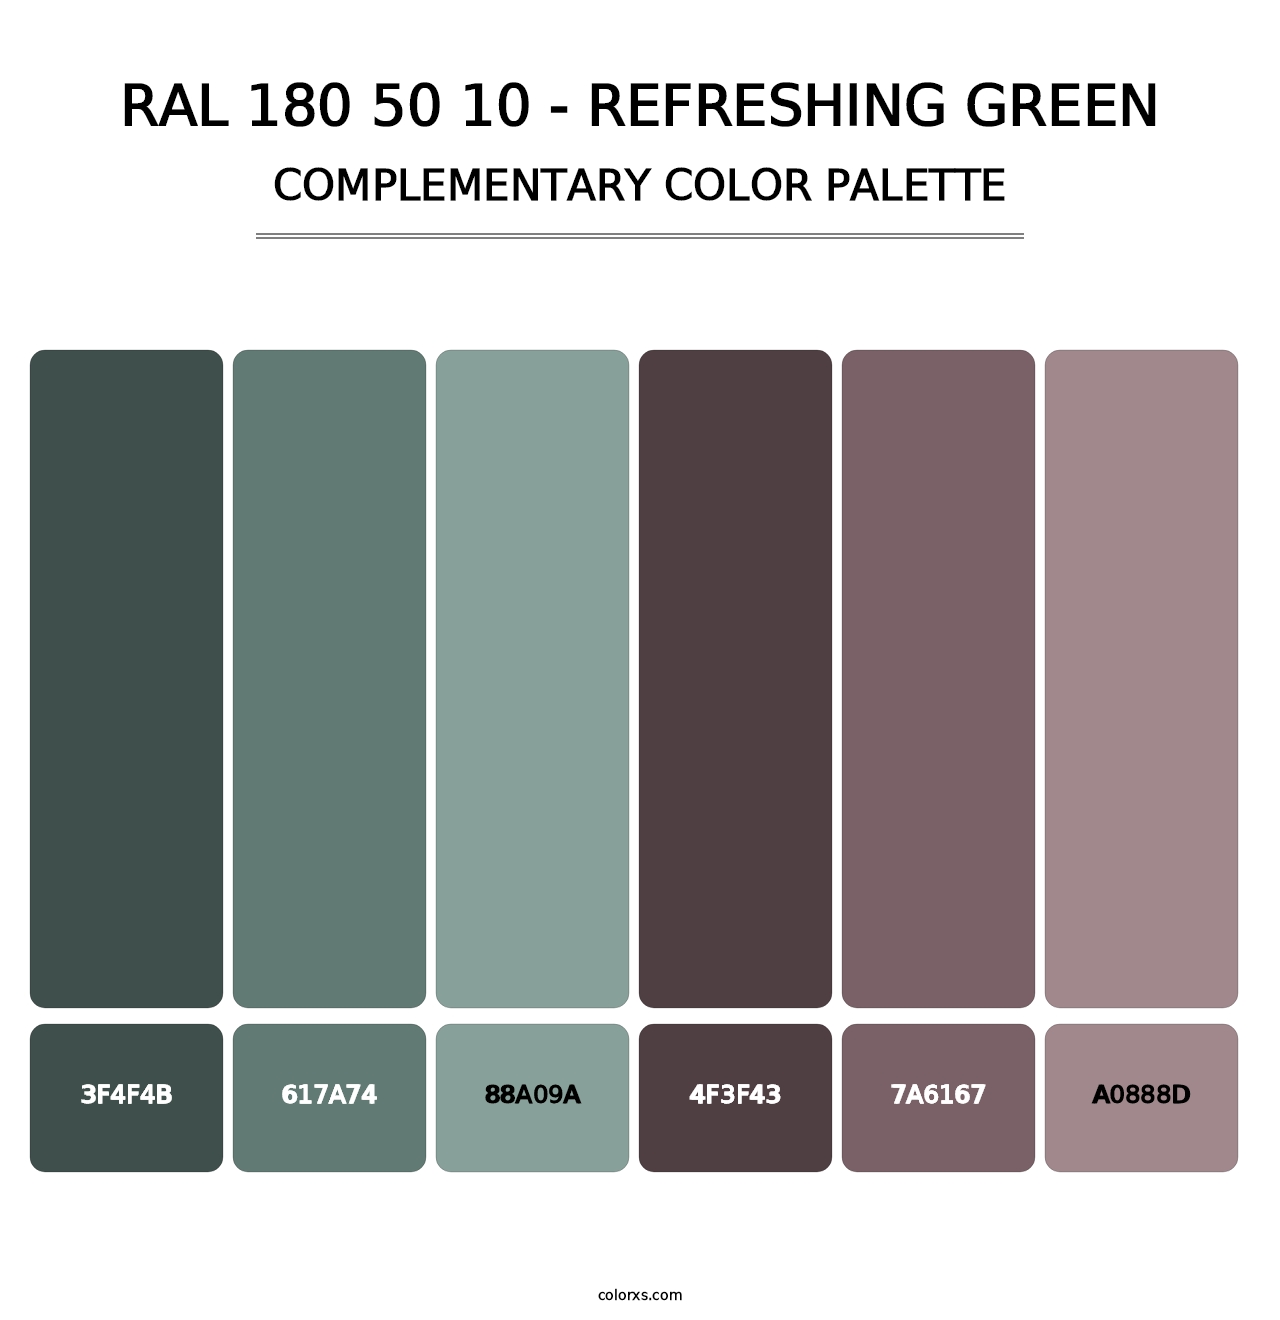 RAL 180 50 10 - Refreshing Green - Complementary Color Palette